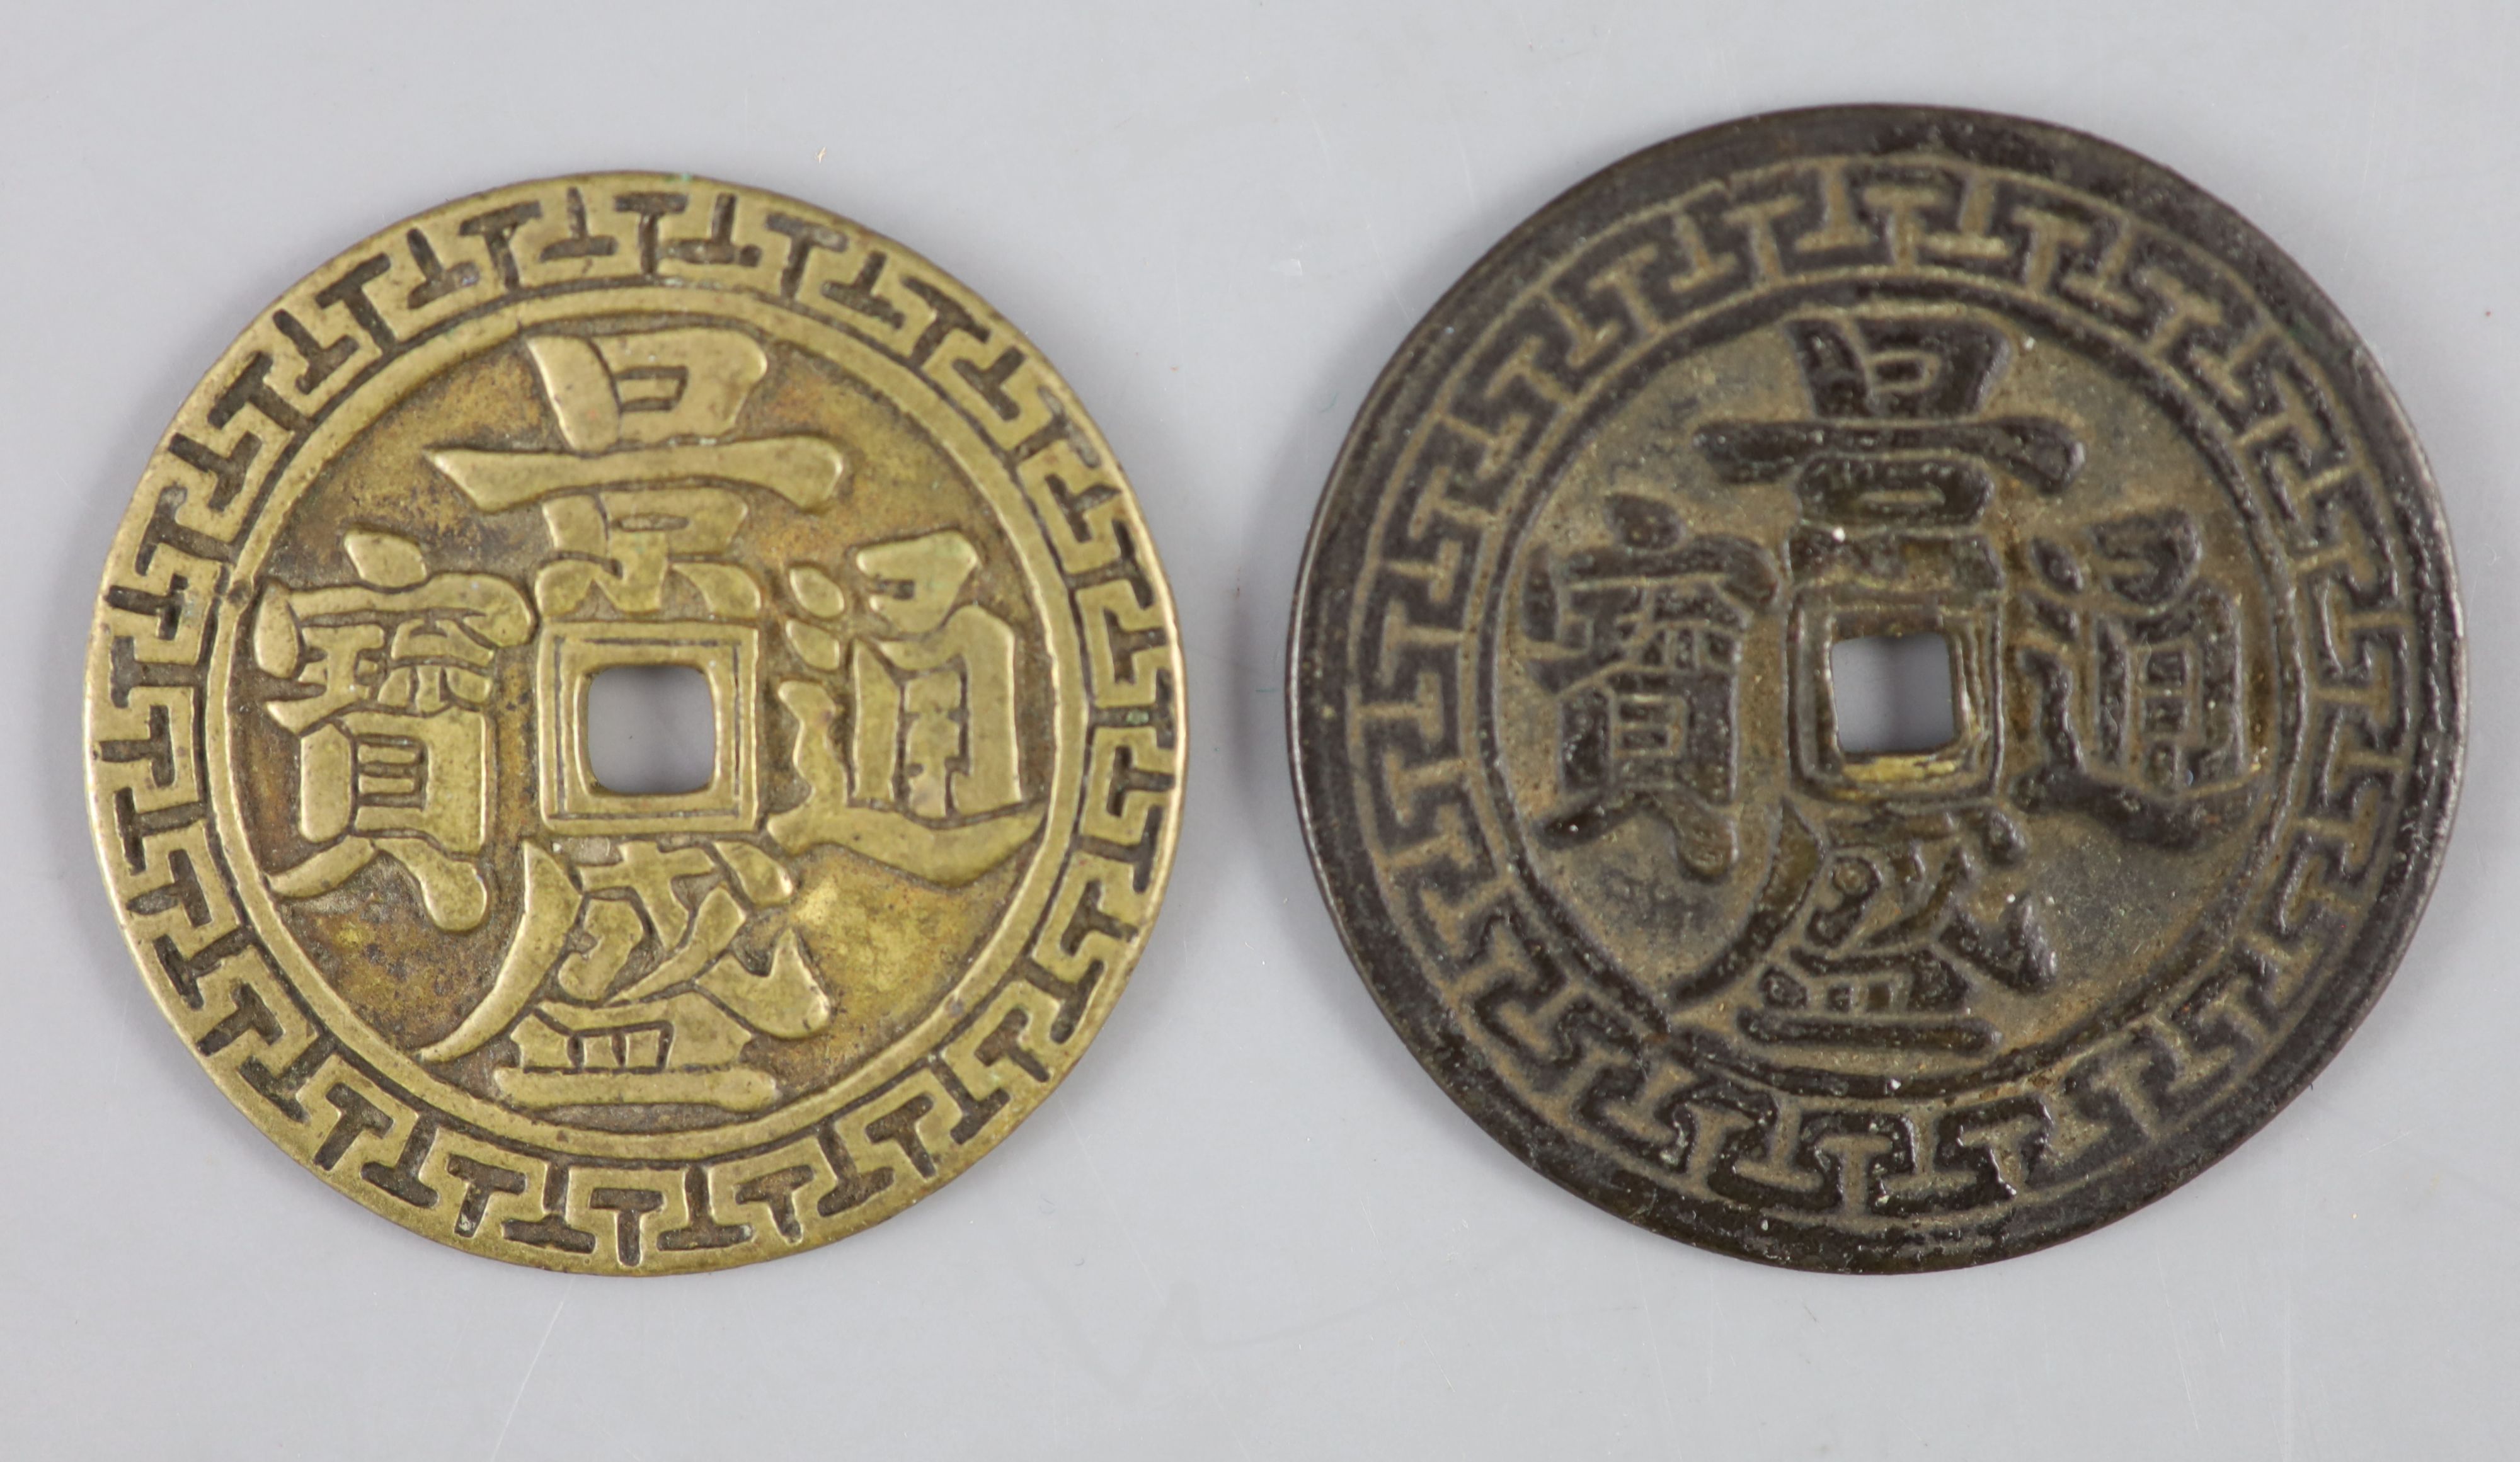 Vietnam coins, Annam, Canh Thinh (1793-1802) two bronze 60-Van Large Cash, Schroeder 480 and 481,